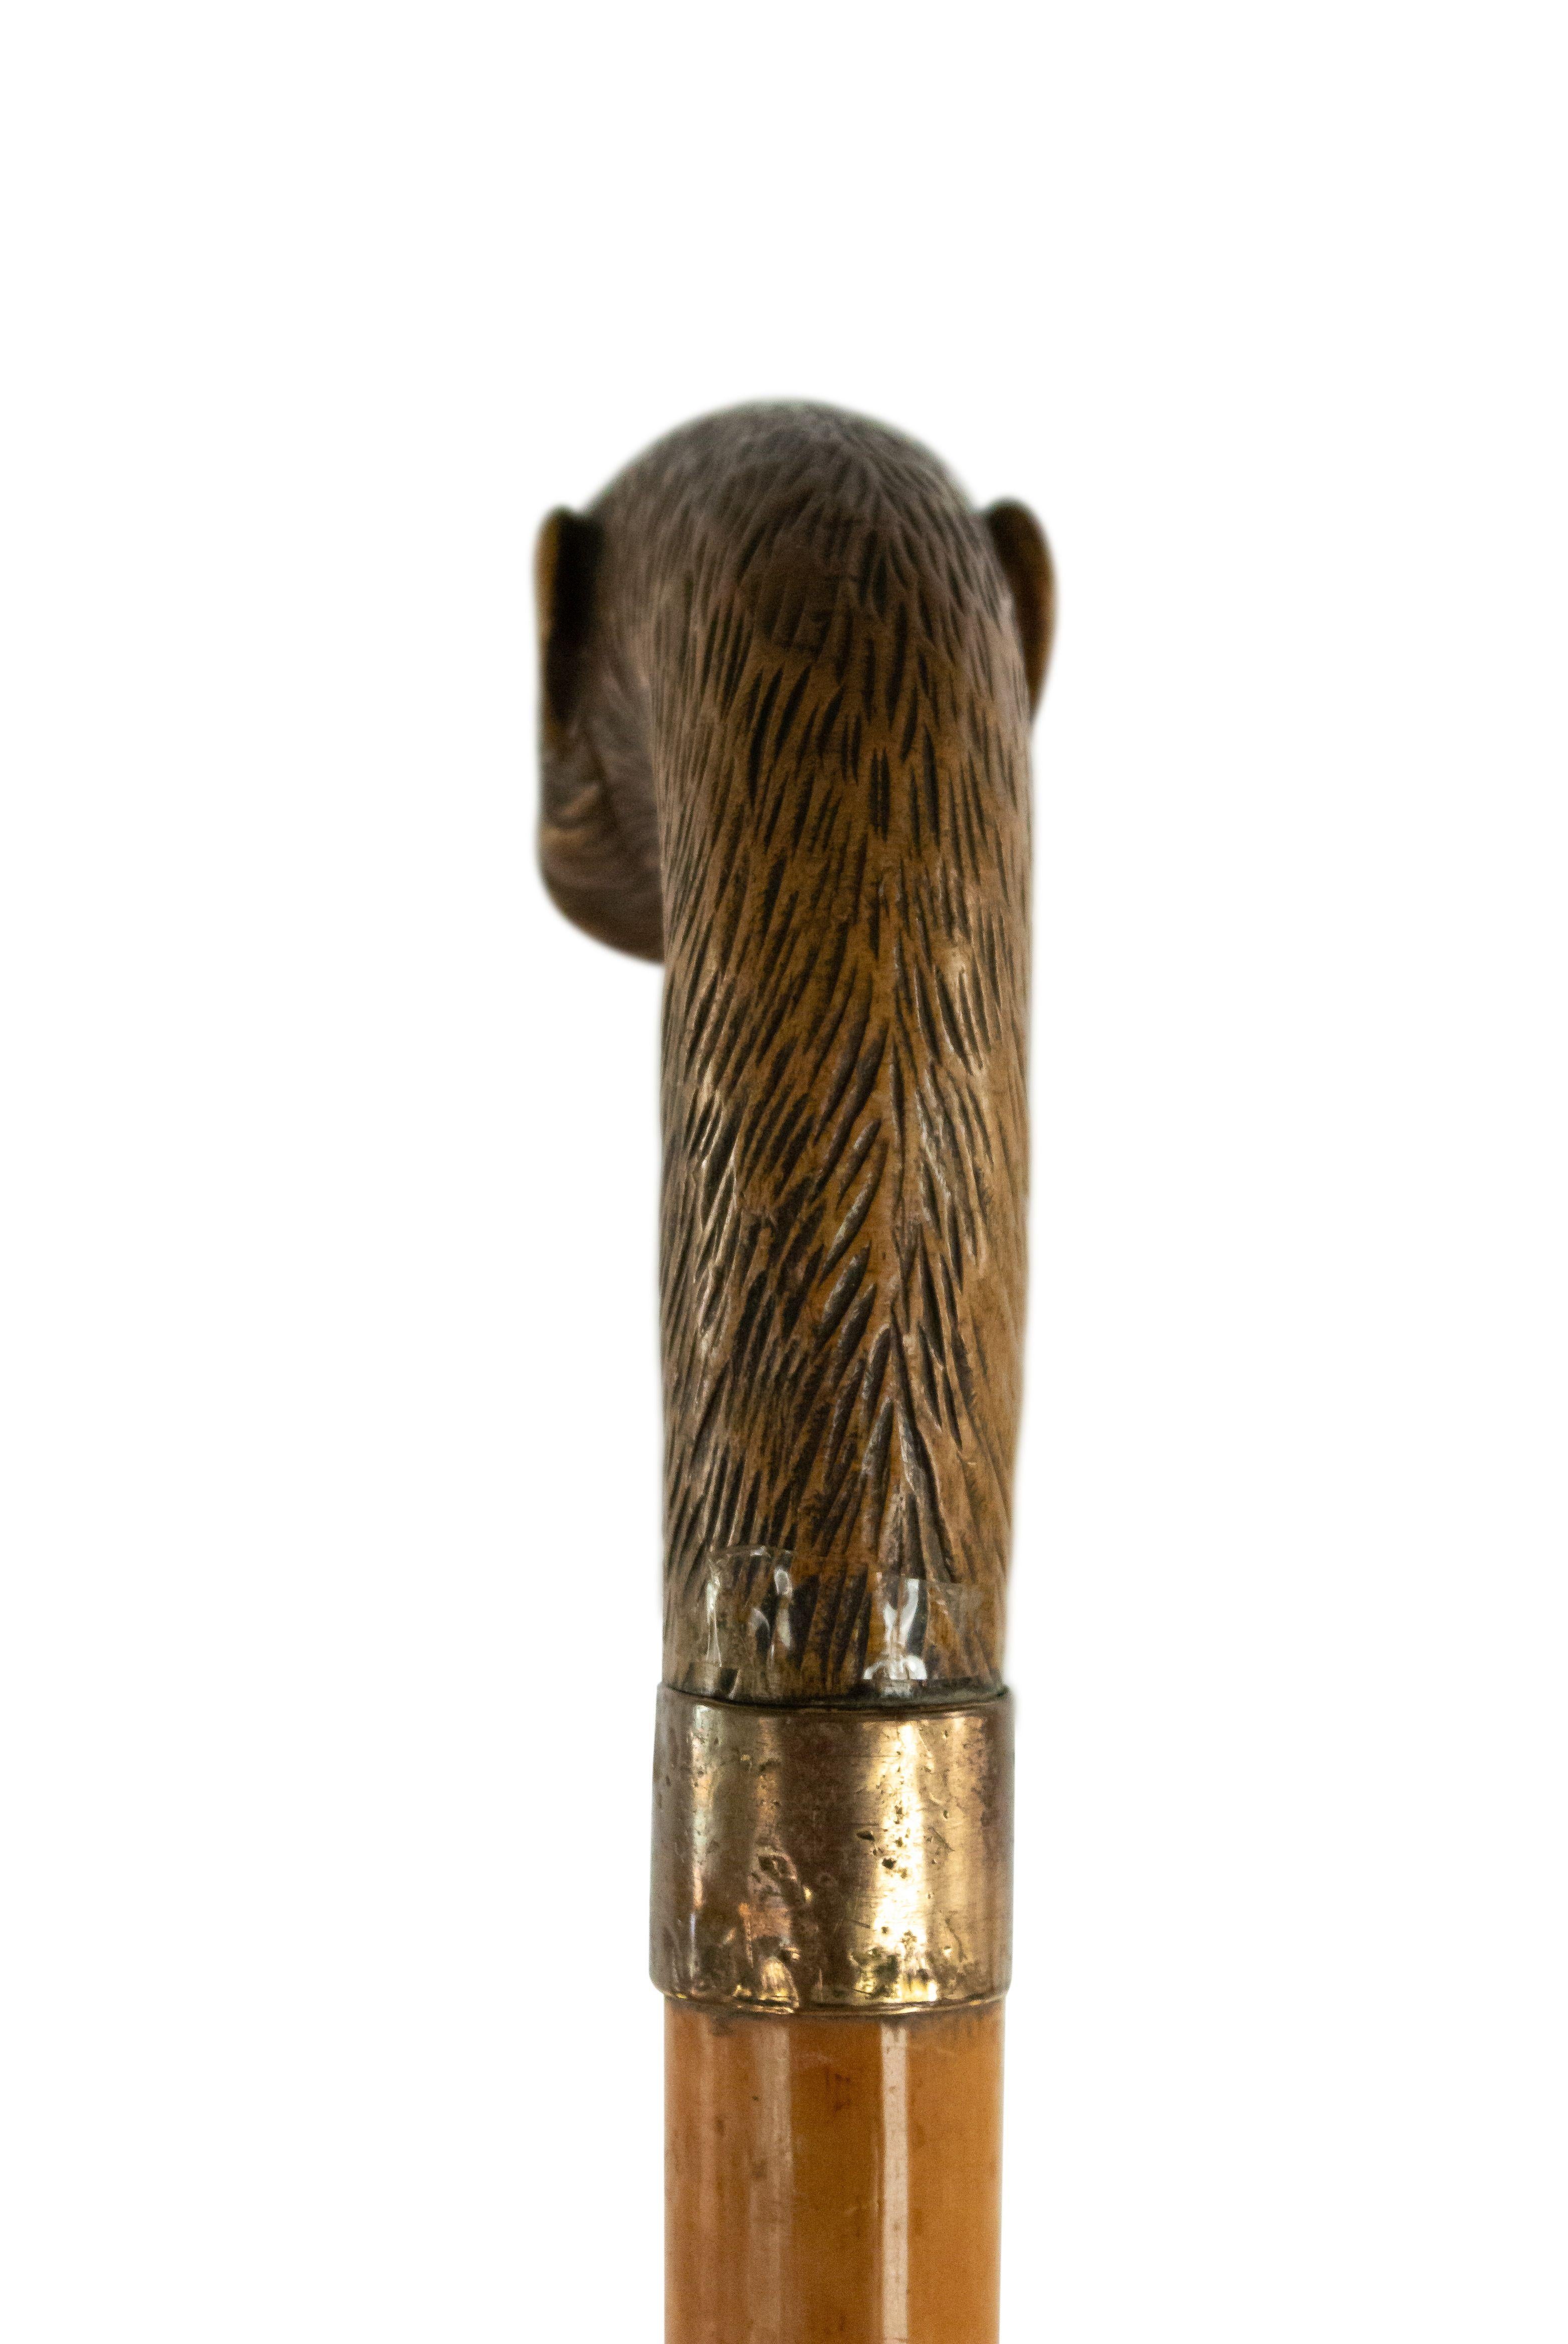 English Victorian walking cane with light wood shaft and handle carved as monkey head with metal alloy collar stamped 995.
